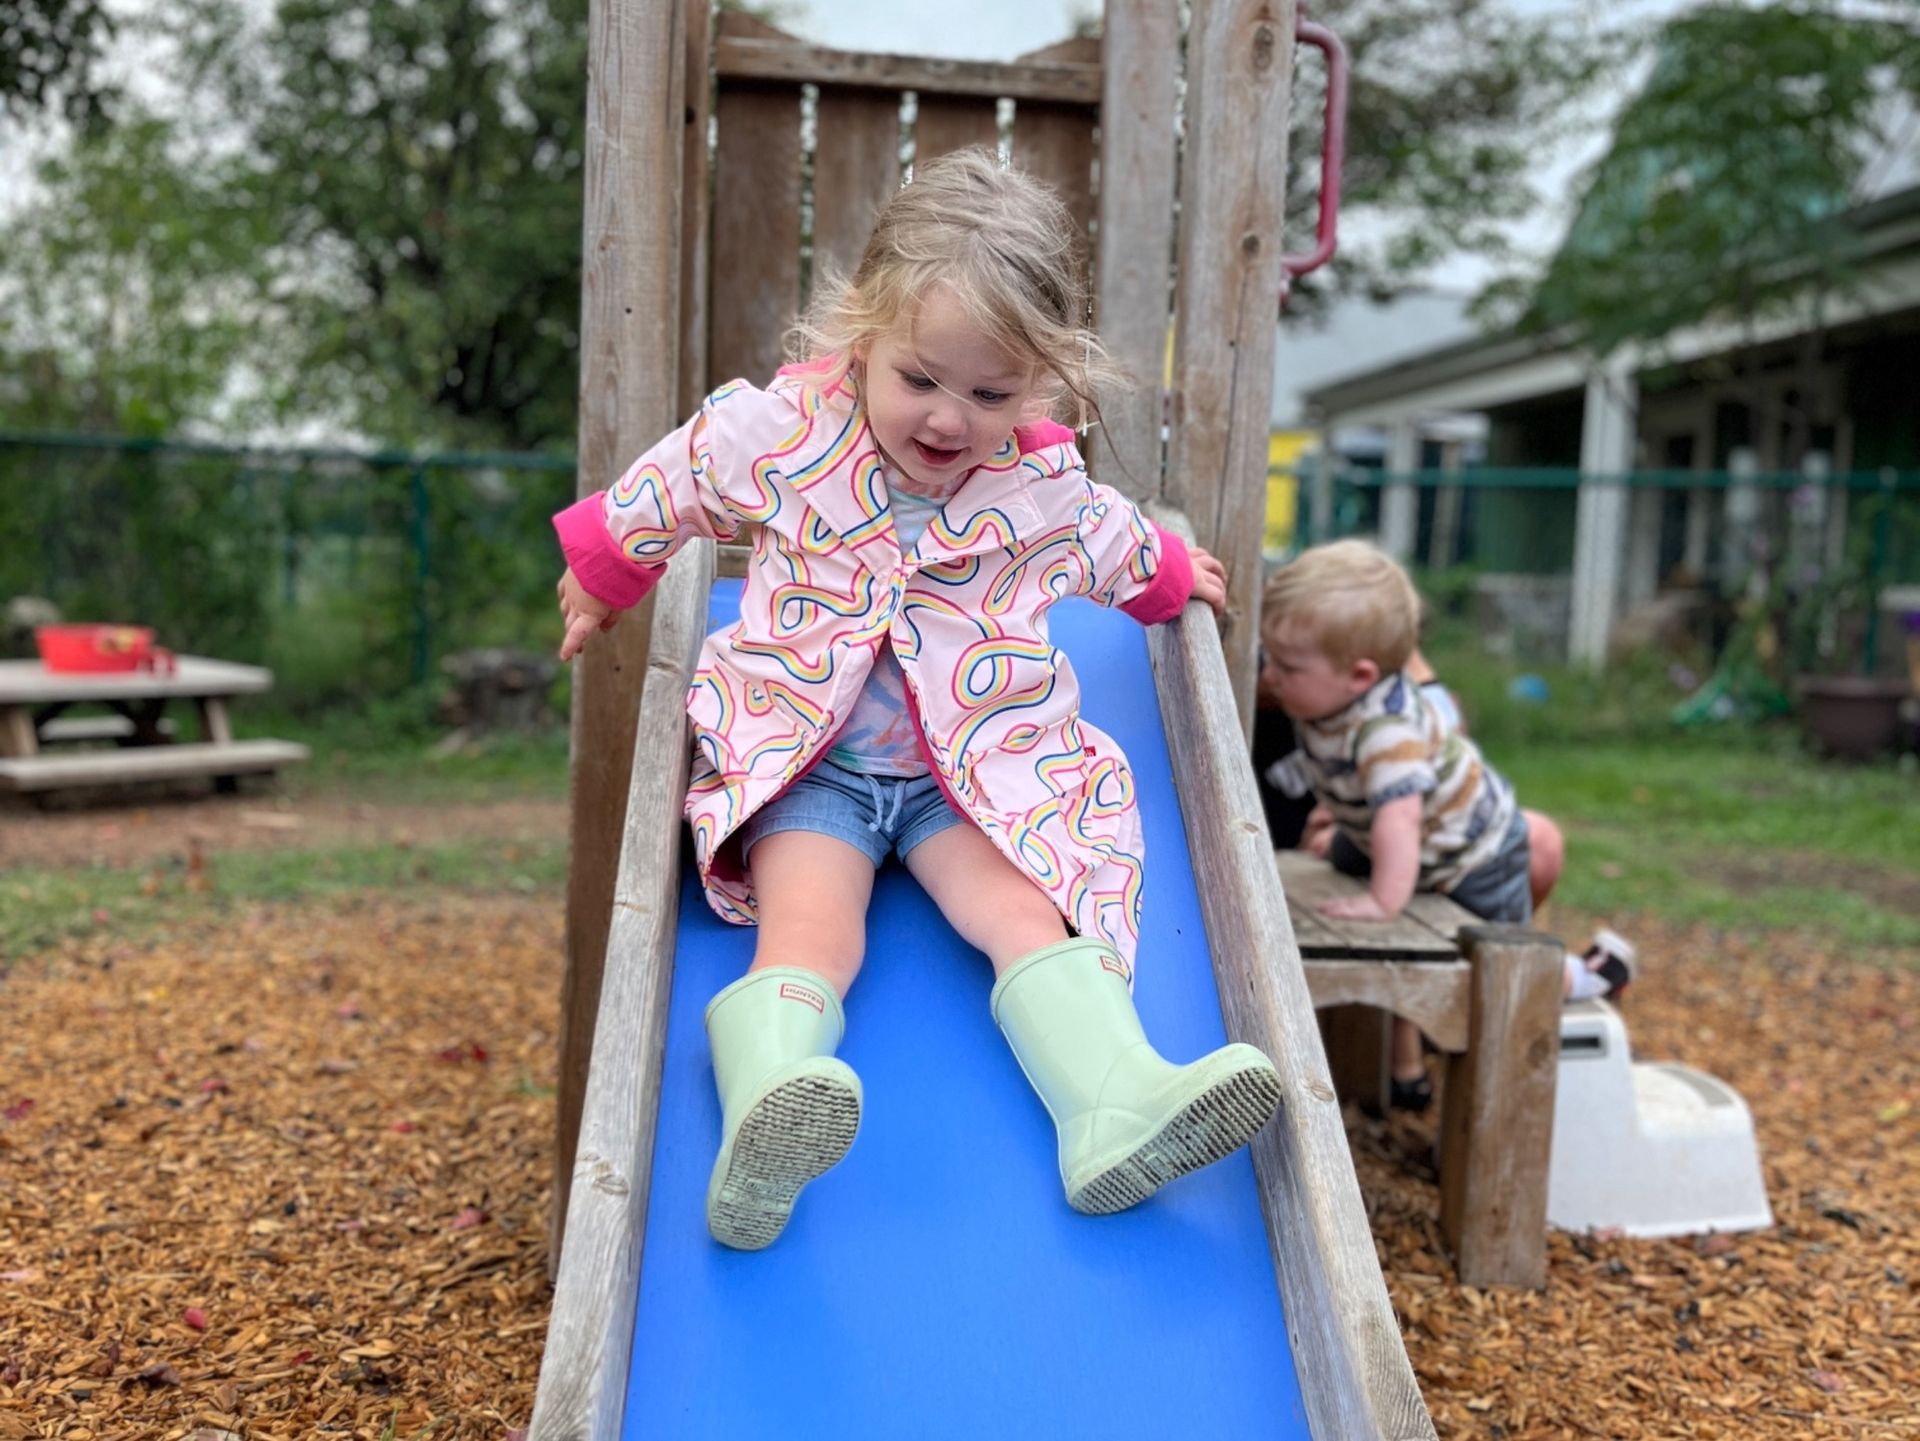 A Montessori little girl wearing rain boots is sitting on a slide